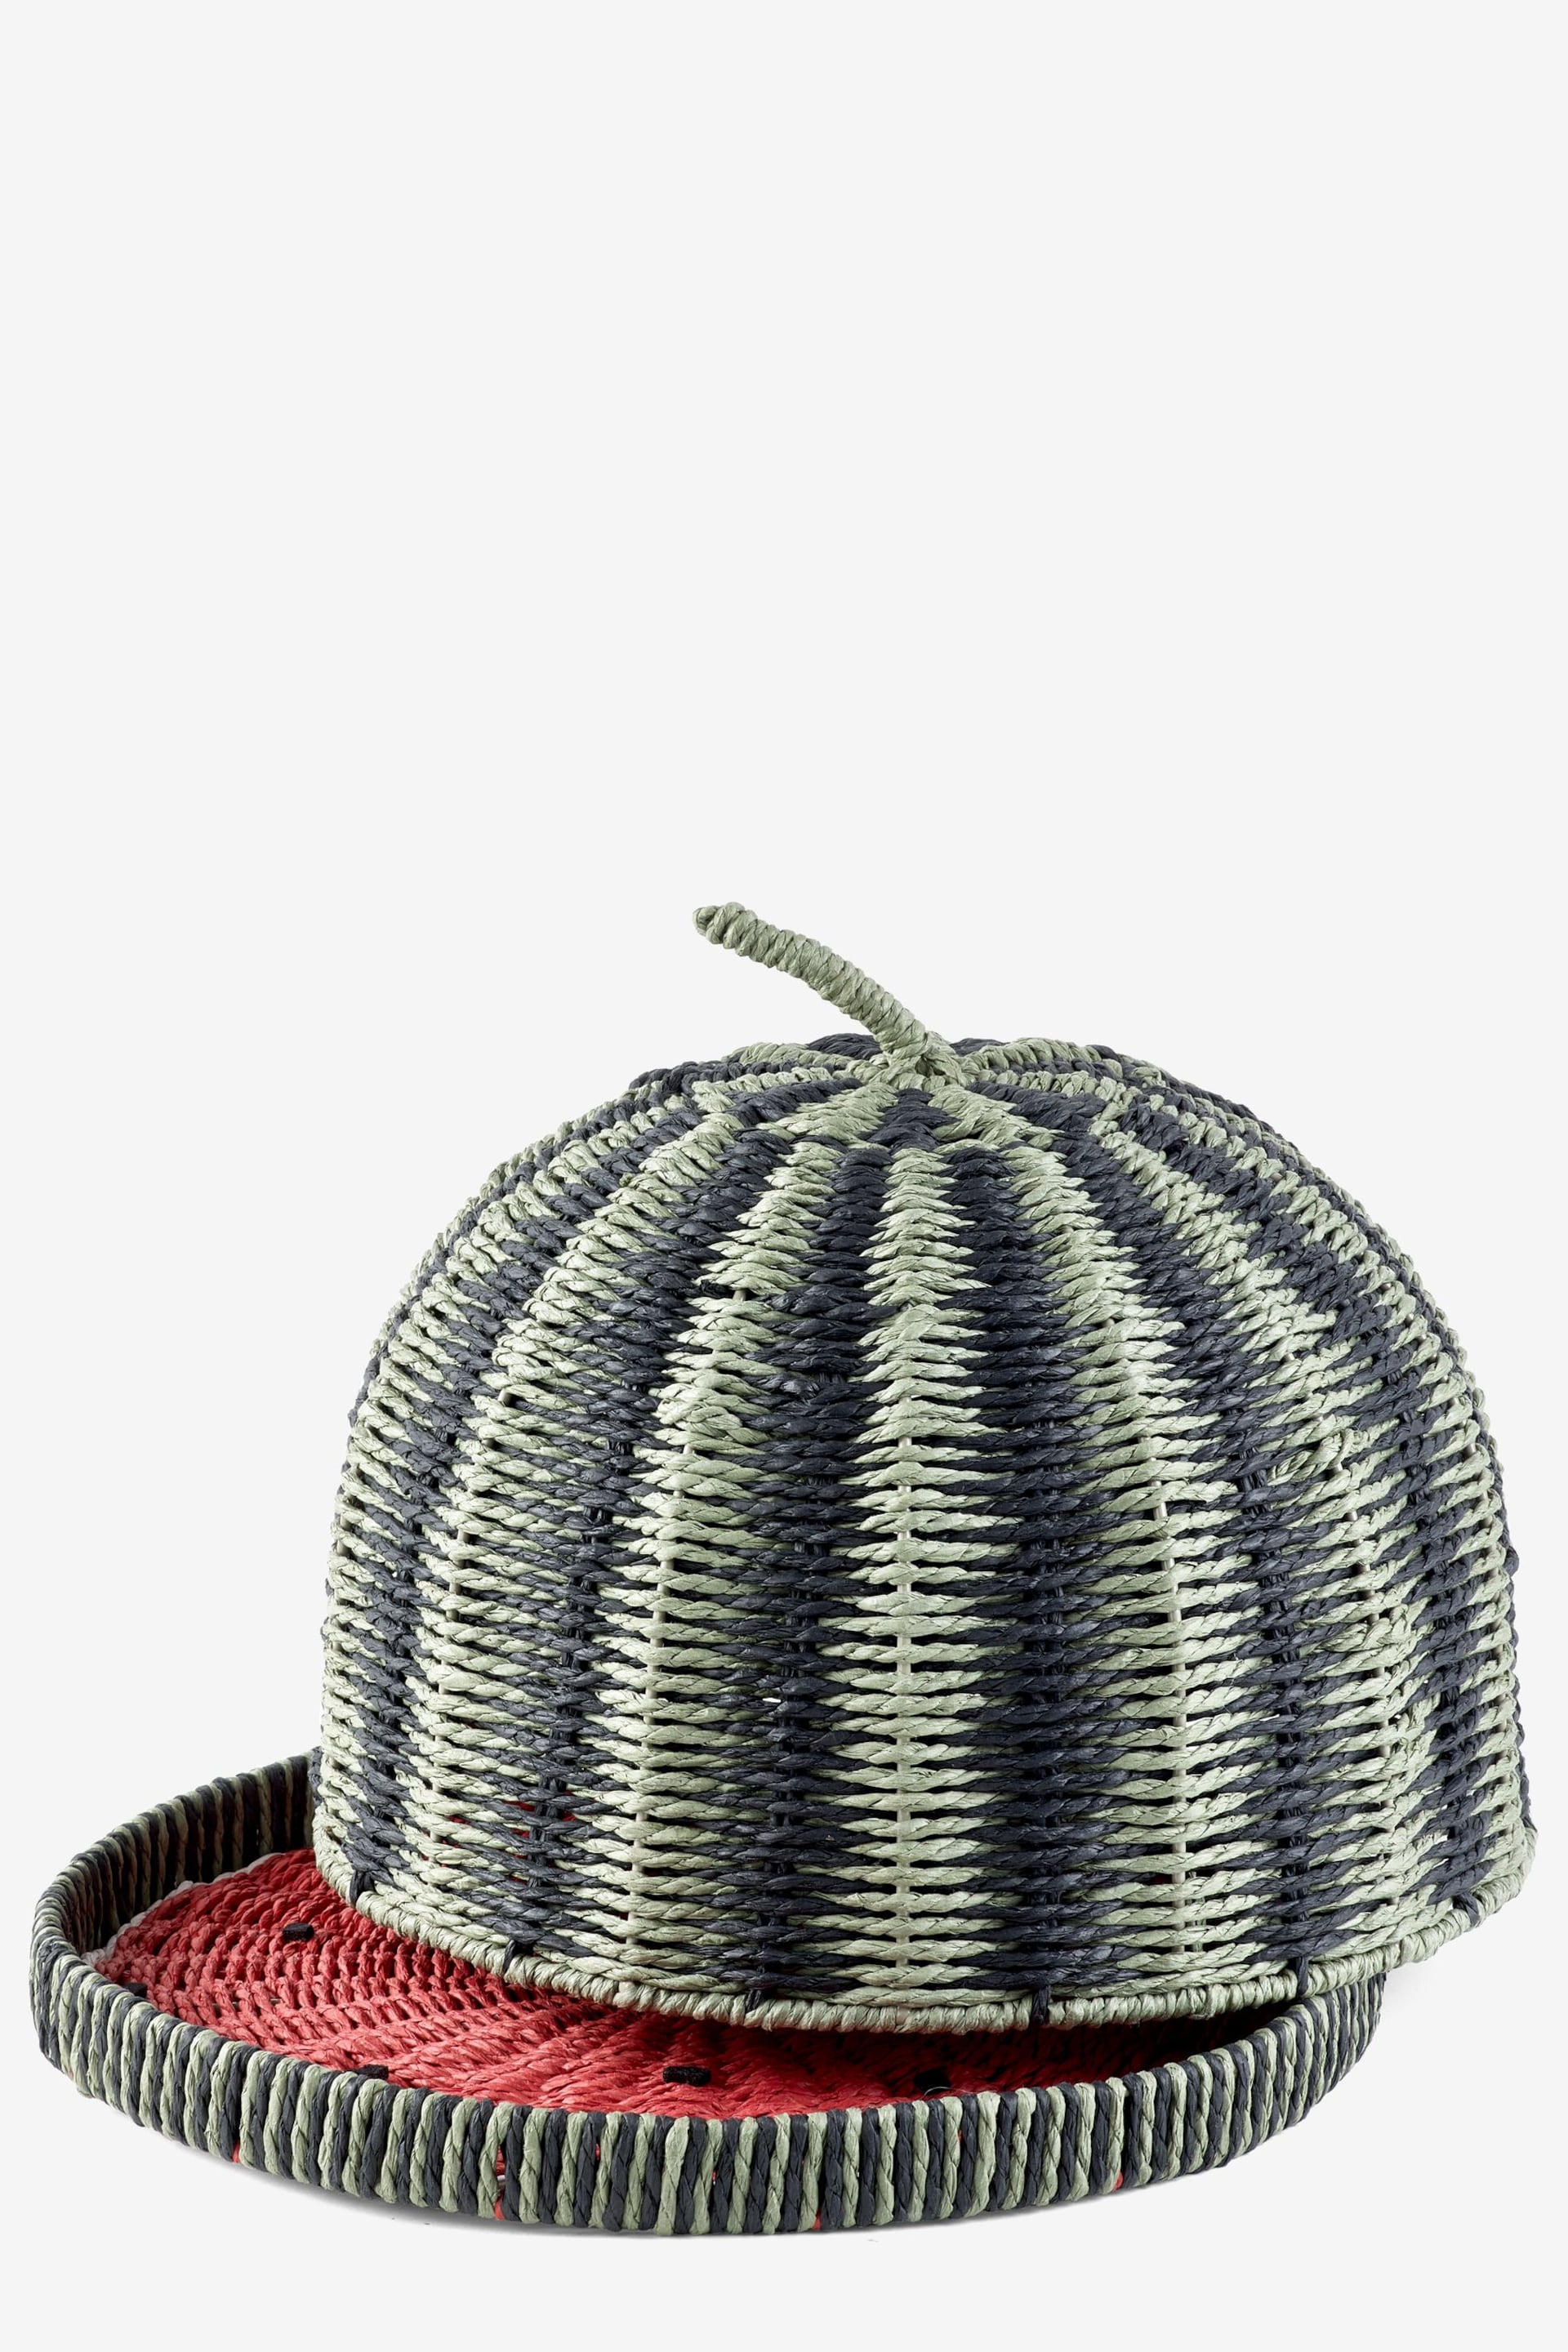 Green Woven Watermelon Food Cover - Image 4 of 5